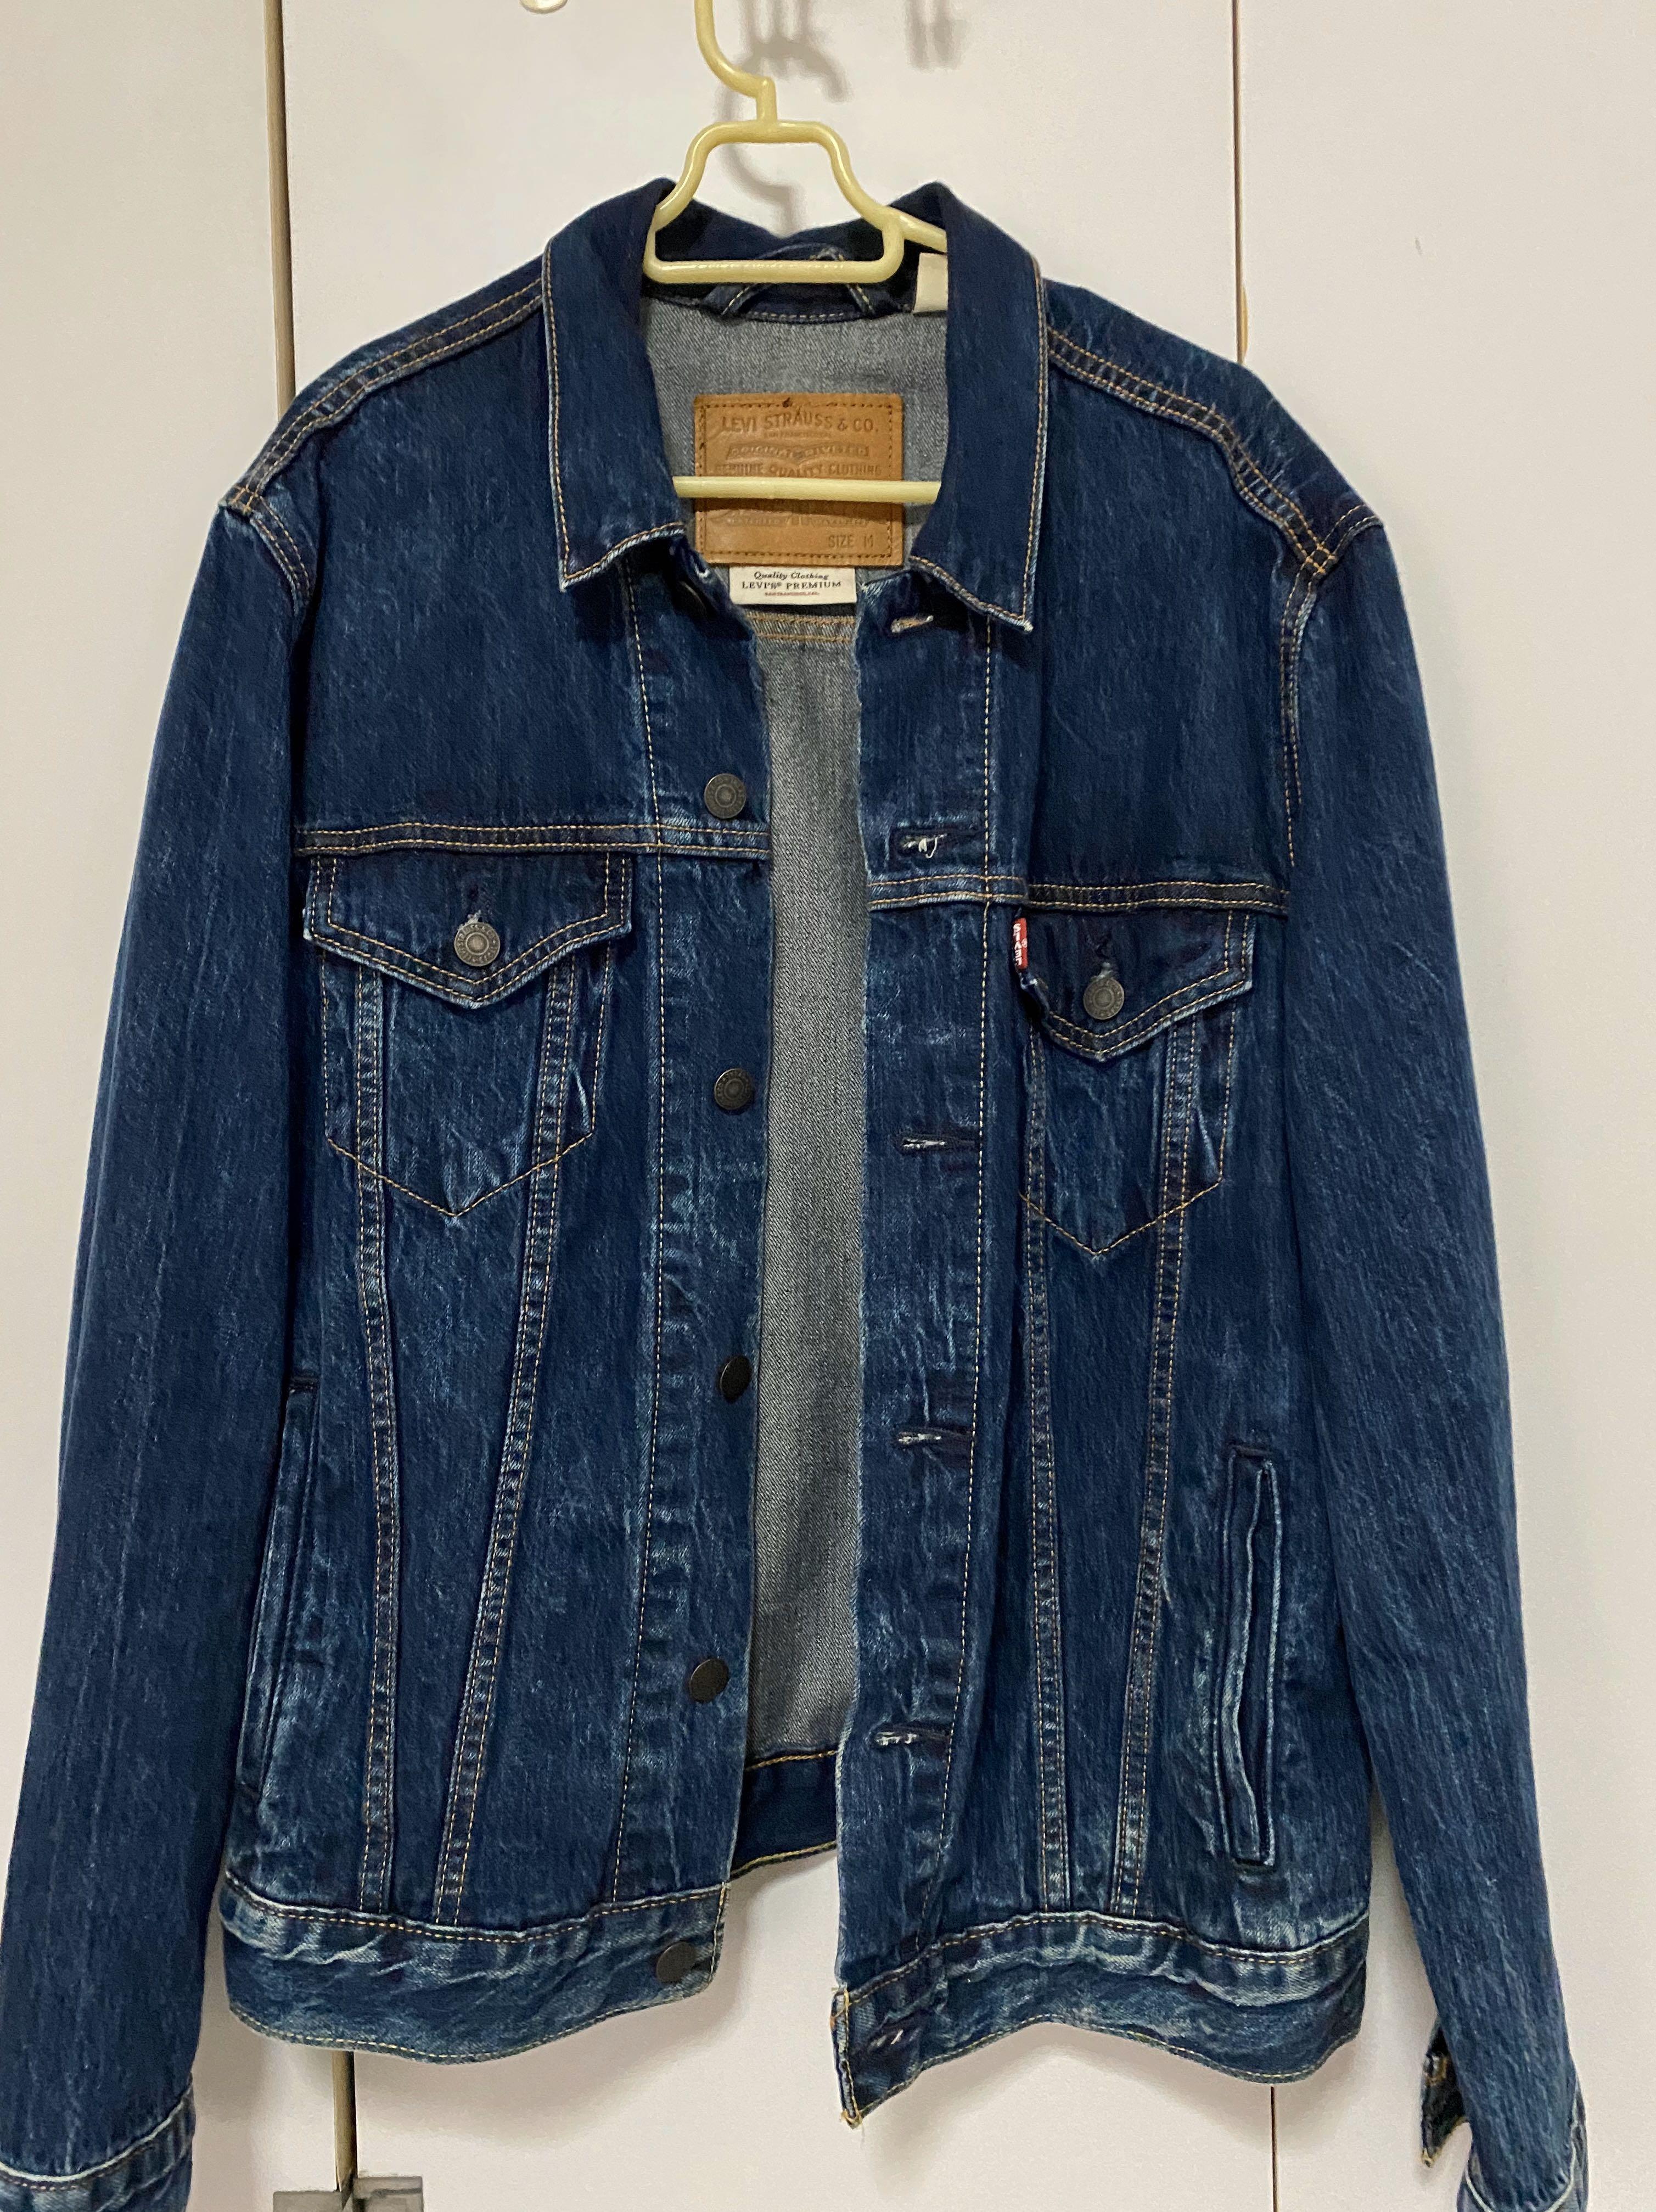 Levi's Premium Collection Denim Jacket Size M, Men's Fashion, Coats,  Jackets and Outerwear on Carousell